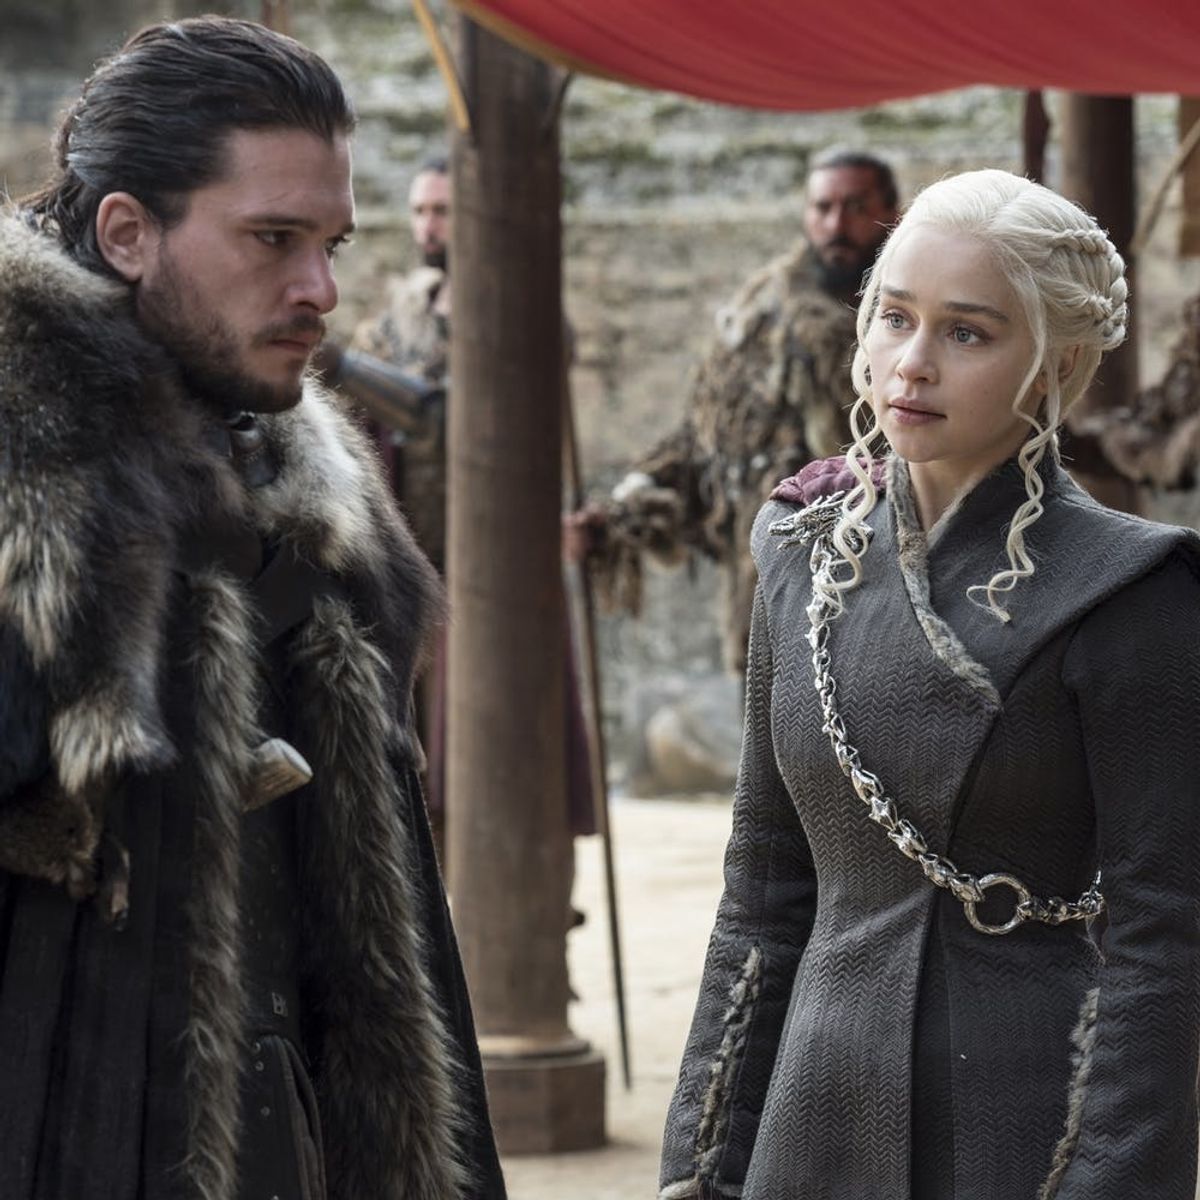 What to Watch If You Already Miss “Game of Thrones”